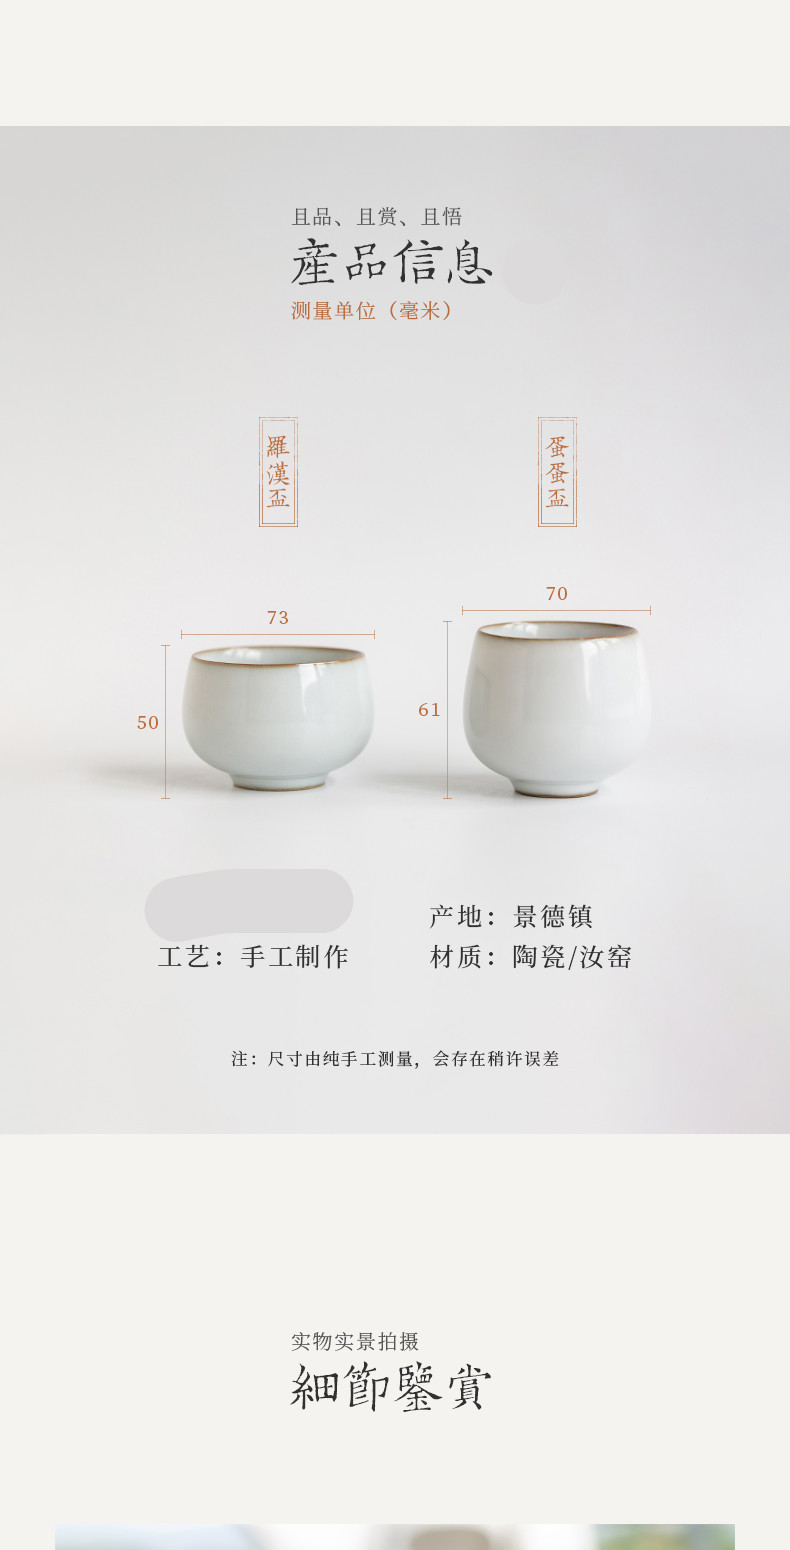 . Poly real boutique scene. The new ocean 's your up cup balls cup sample tea cup master cup single CPU ruzhou your porcelain piece